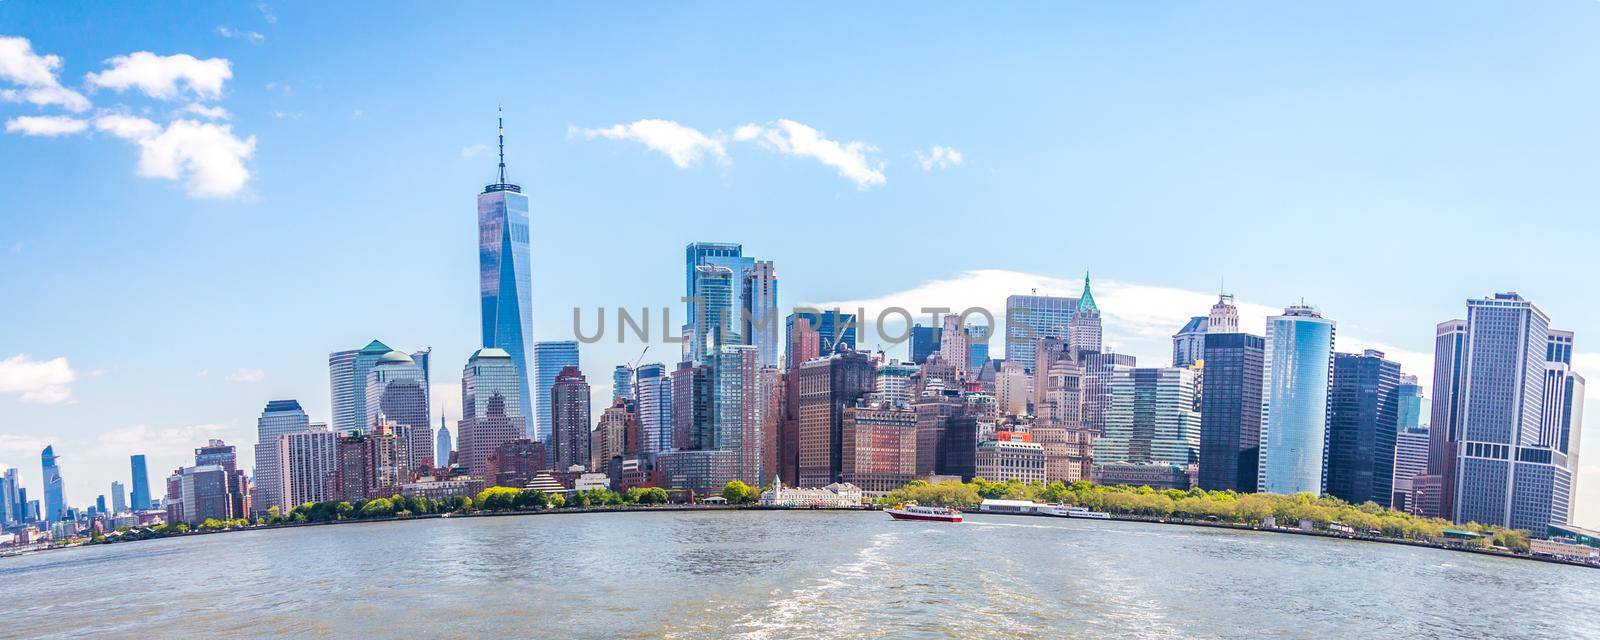 Skyline panorama of downtown Financial District and the Lower Manhattan in New York City, USA. Fish eye effect by Mariakray